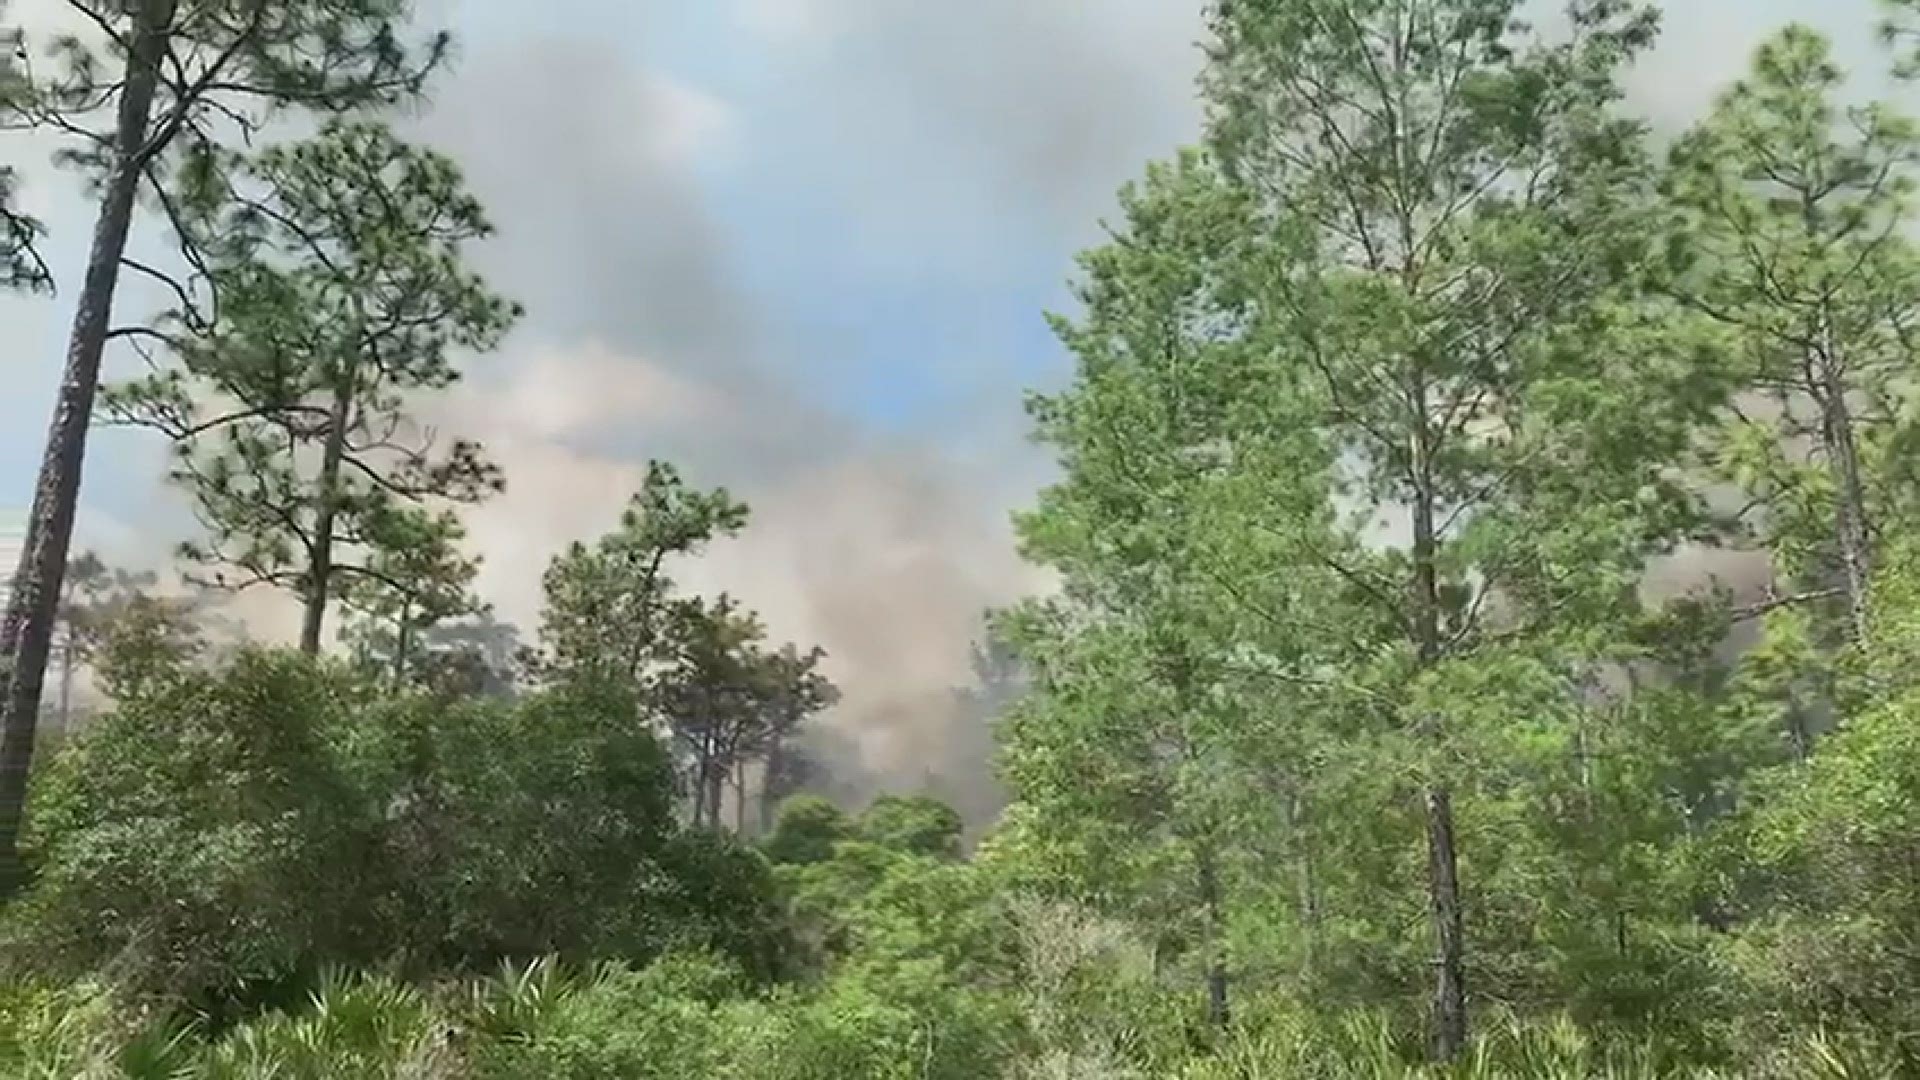 The fire has grown to roughly 20 acres. (Video: Pasco County Fire Rescue)